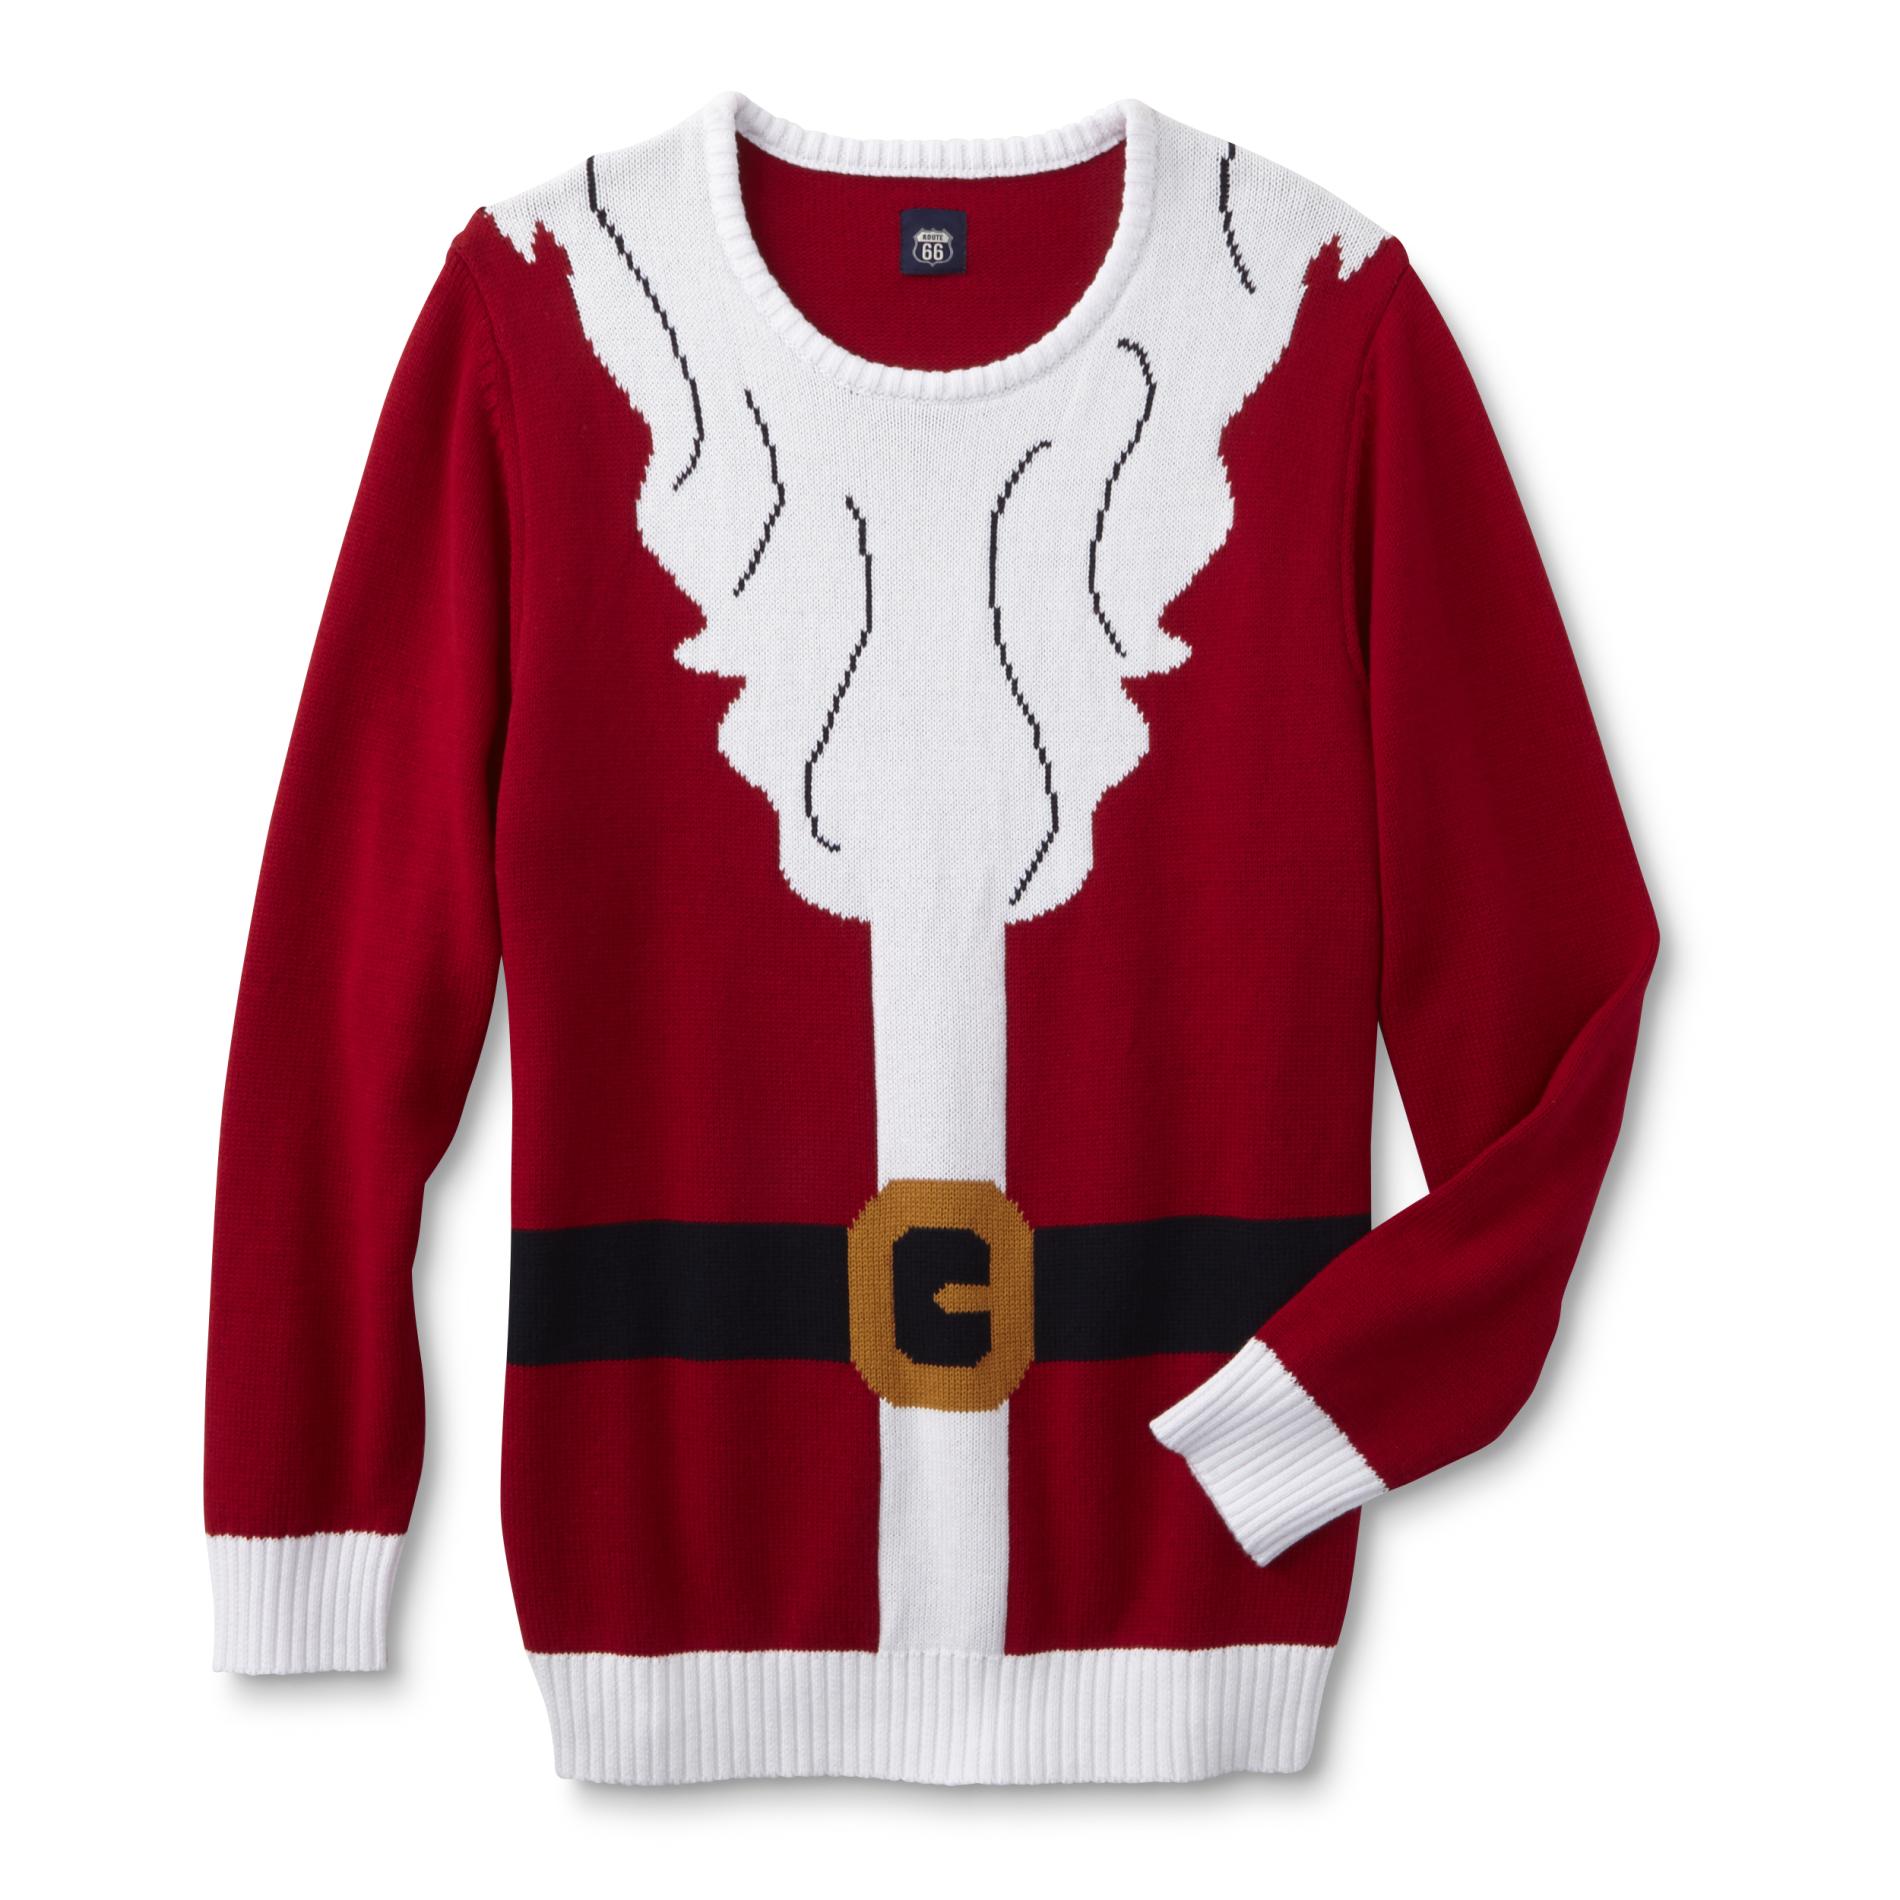 Route 66 Men's Ugly Christmas Sweater - Santa